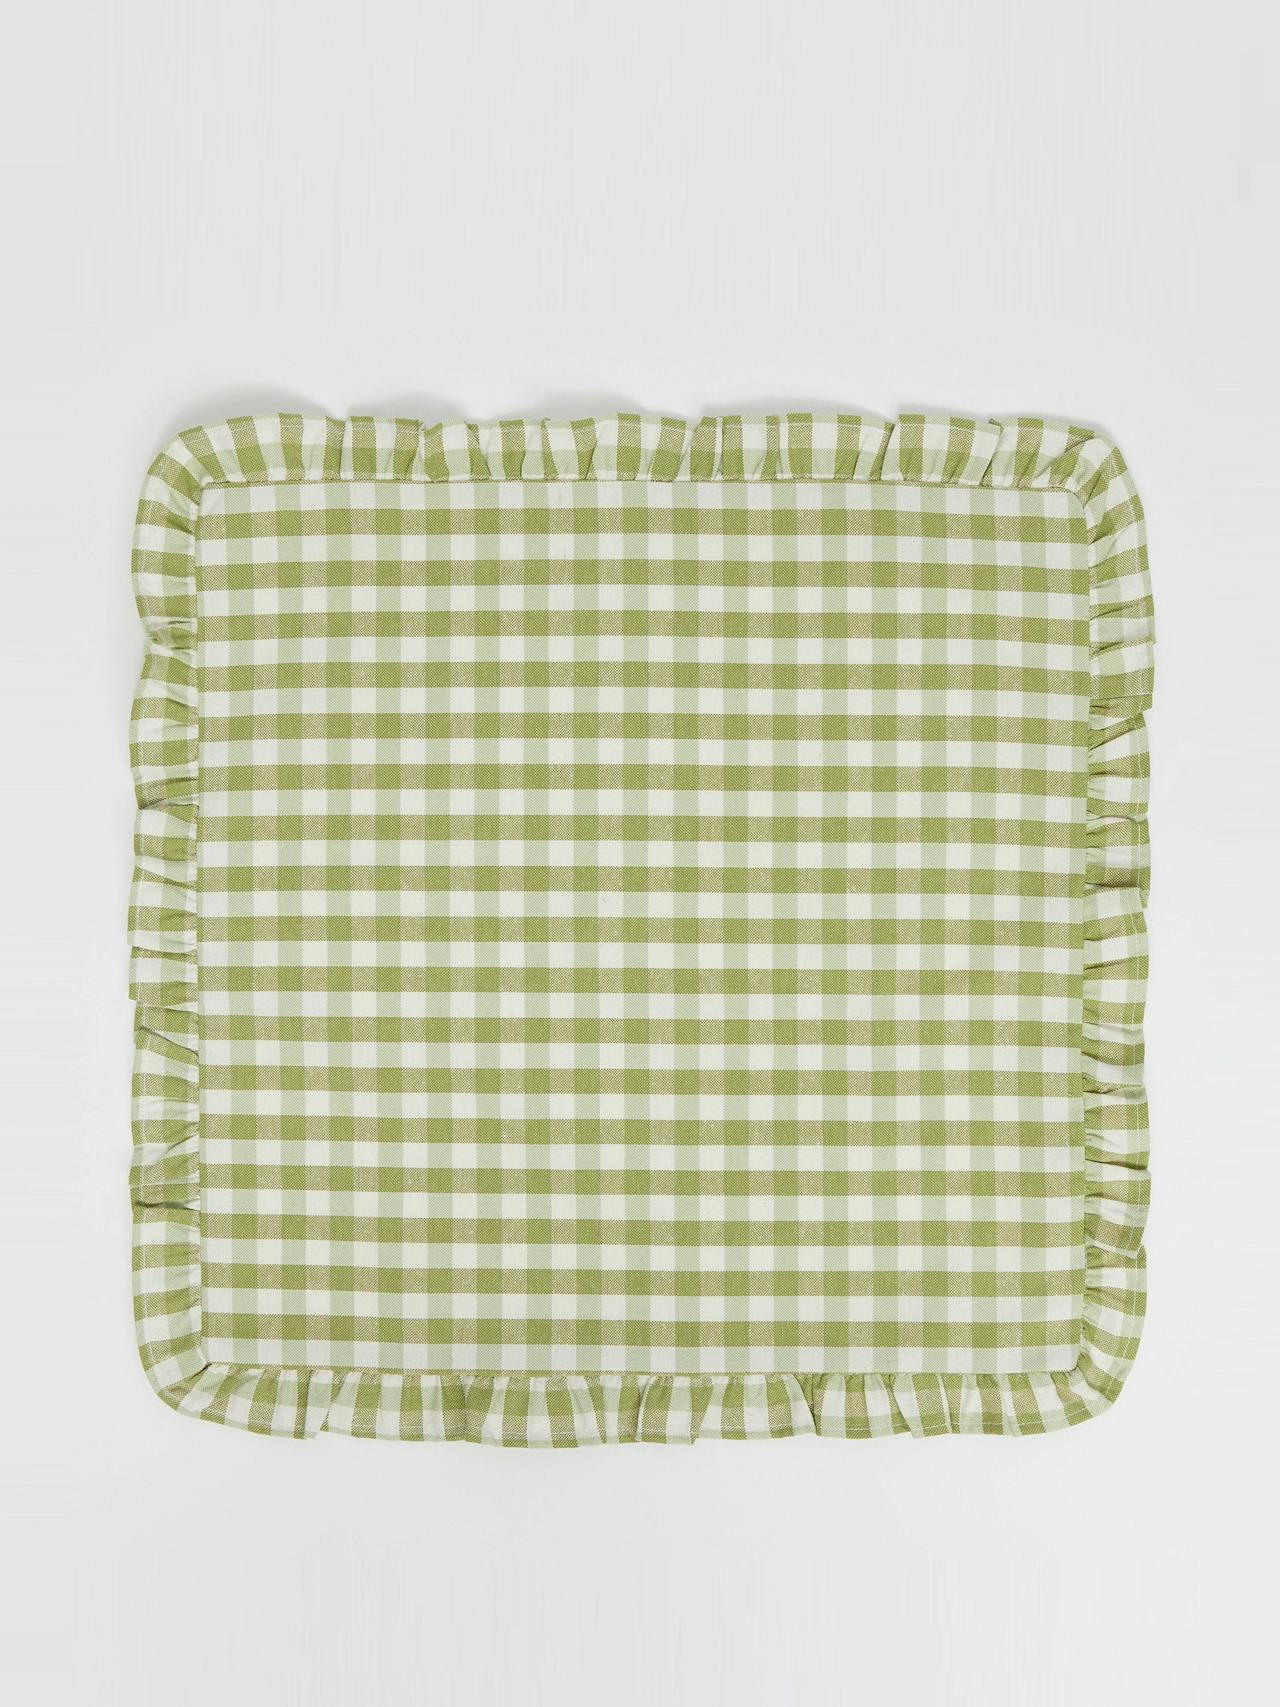 Summer green gingham placemats, set of 4